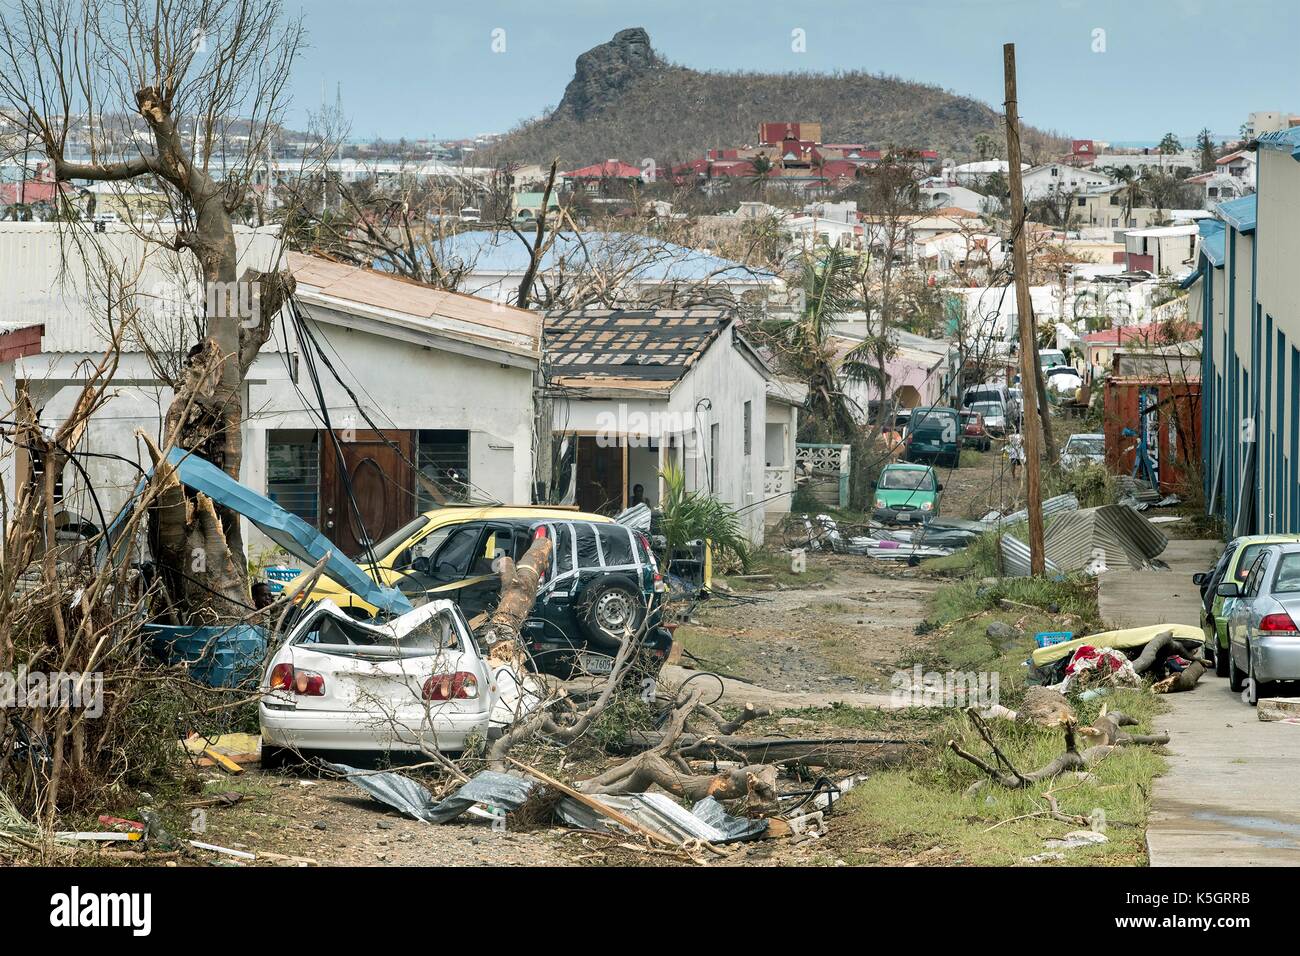 Vehicles and debris from destroyed homes litter the historic district on the Dutch island of St Maarten following a direct hit by Hurricane Irma, a Category 5 storm lashing the Caribbean September 8, 2017 in Philipsburg, St. Maarten. Stock Photo